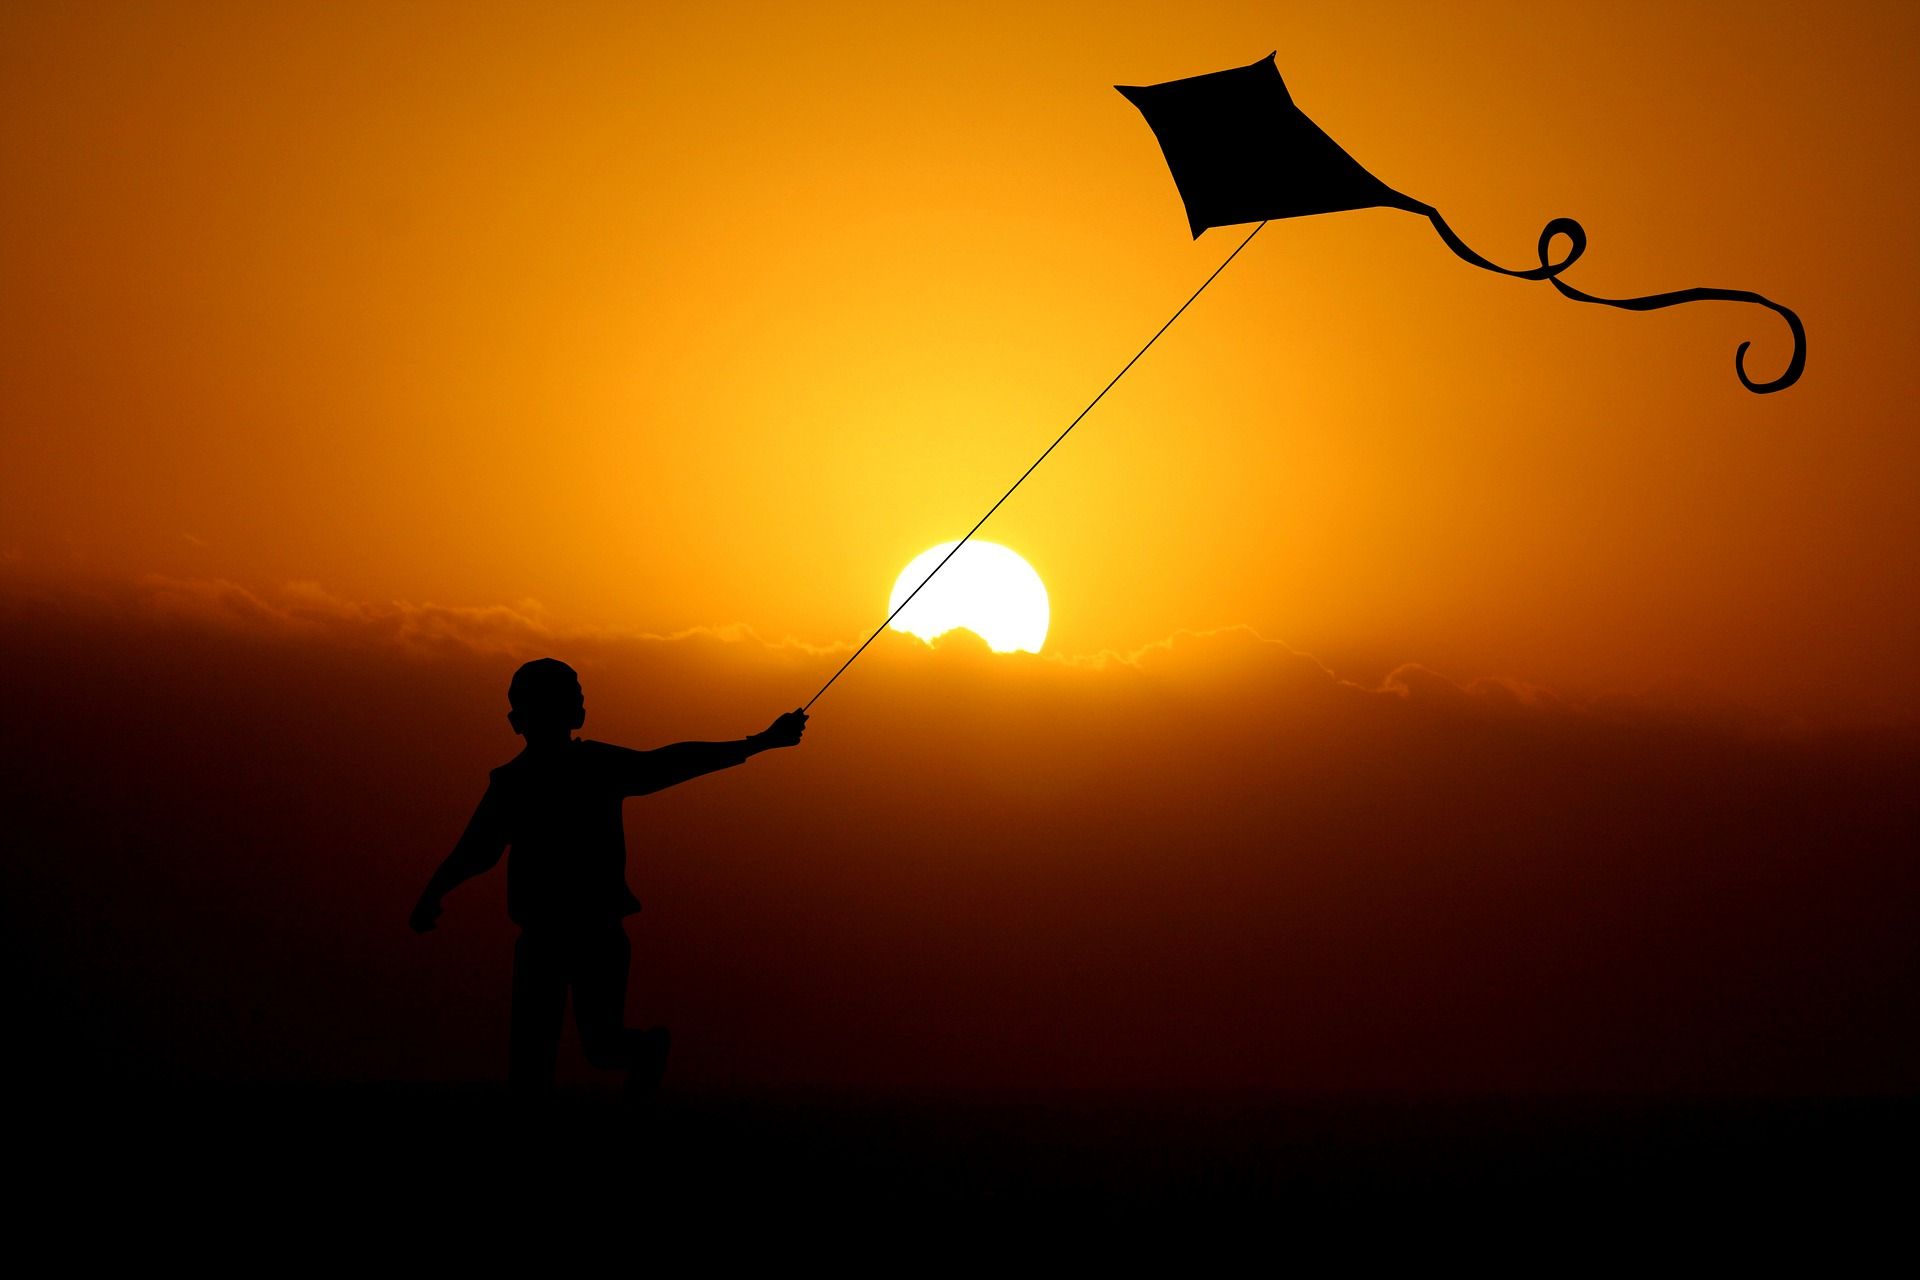 Child with a kite silhouette